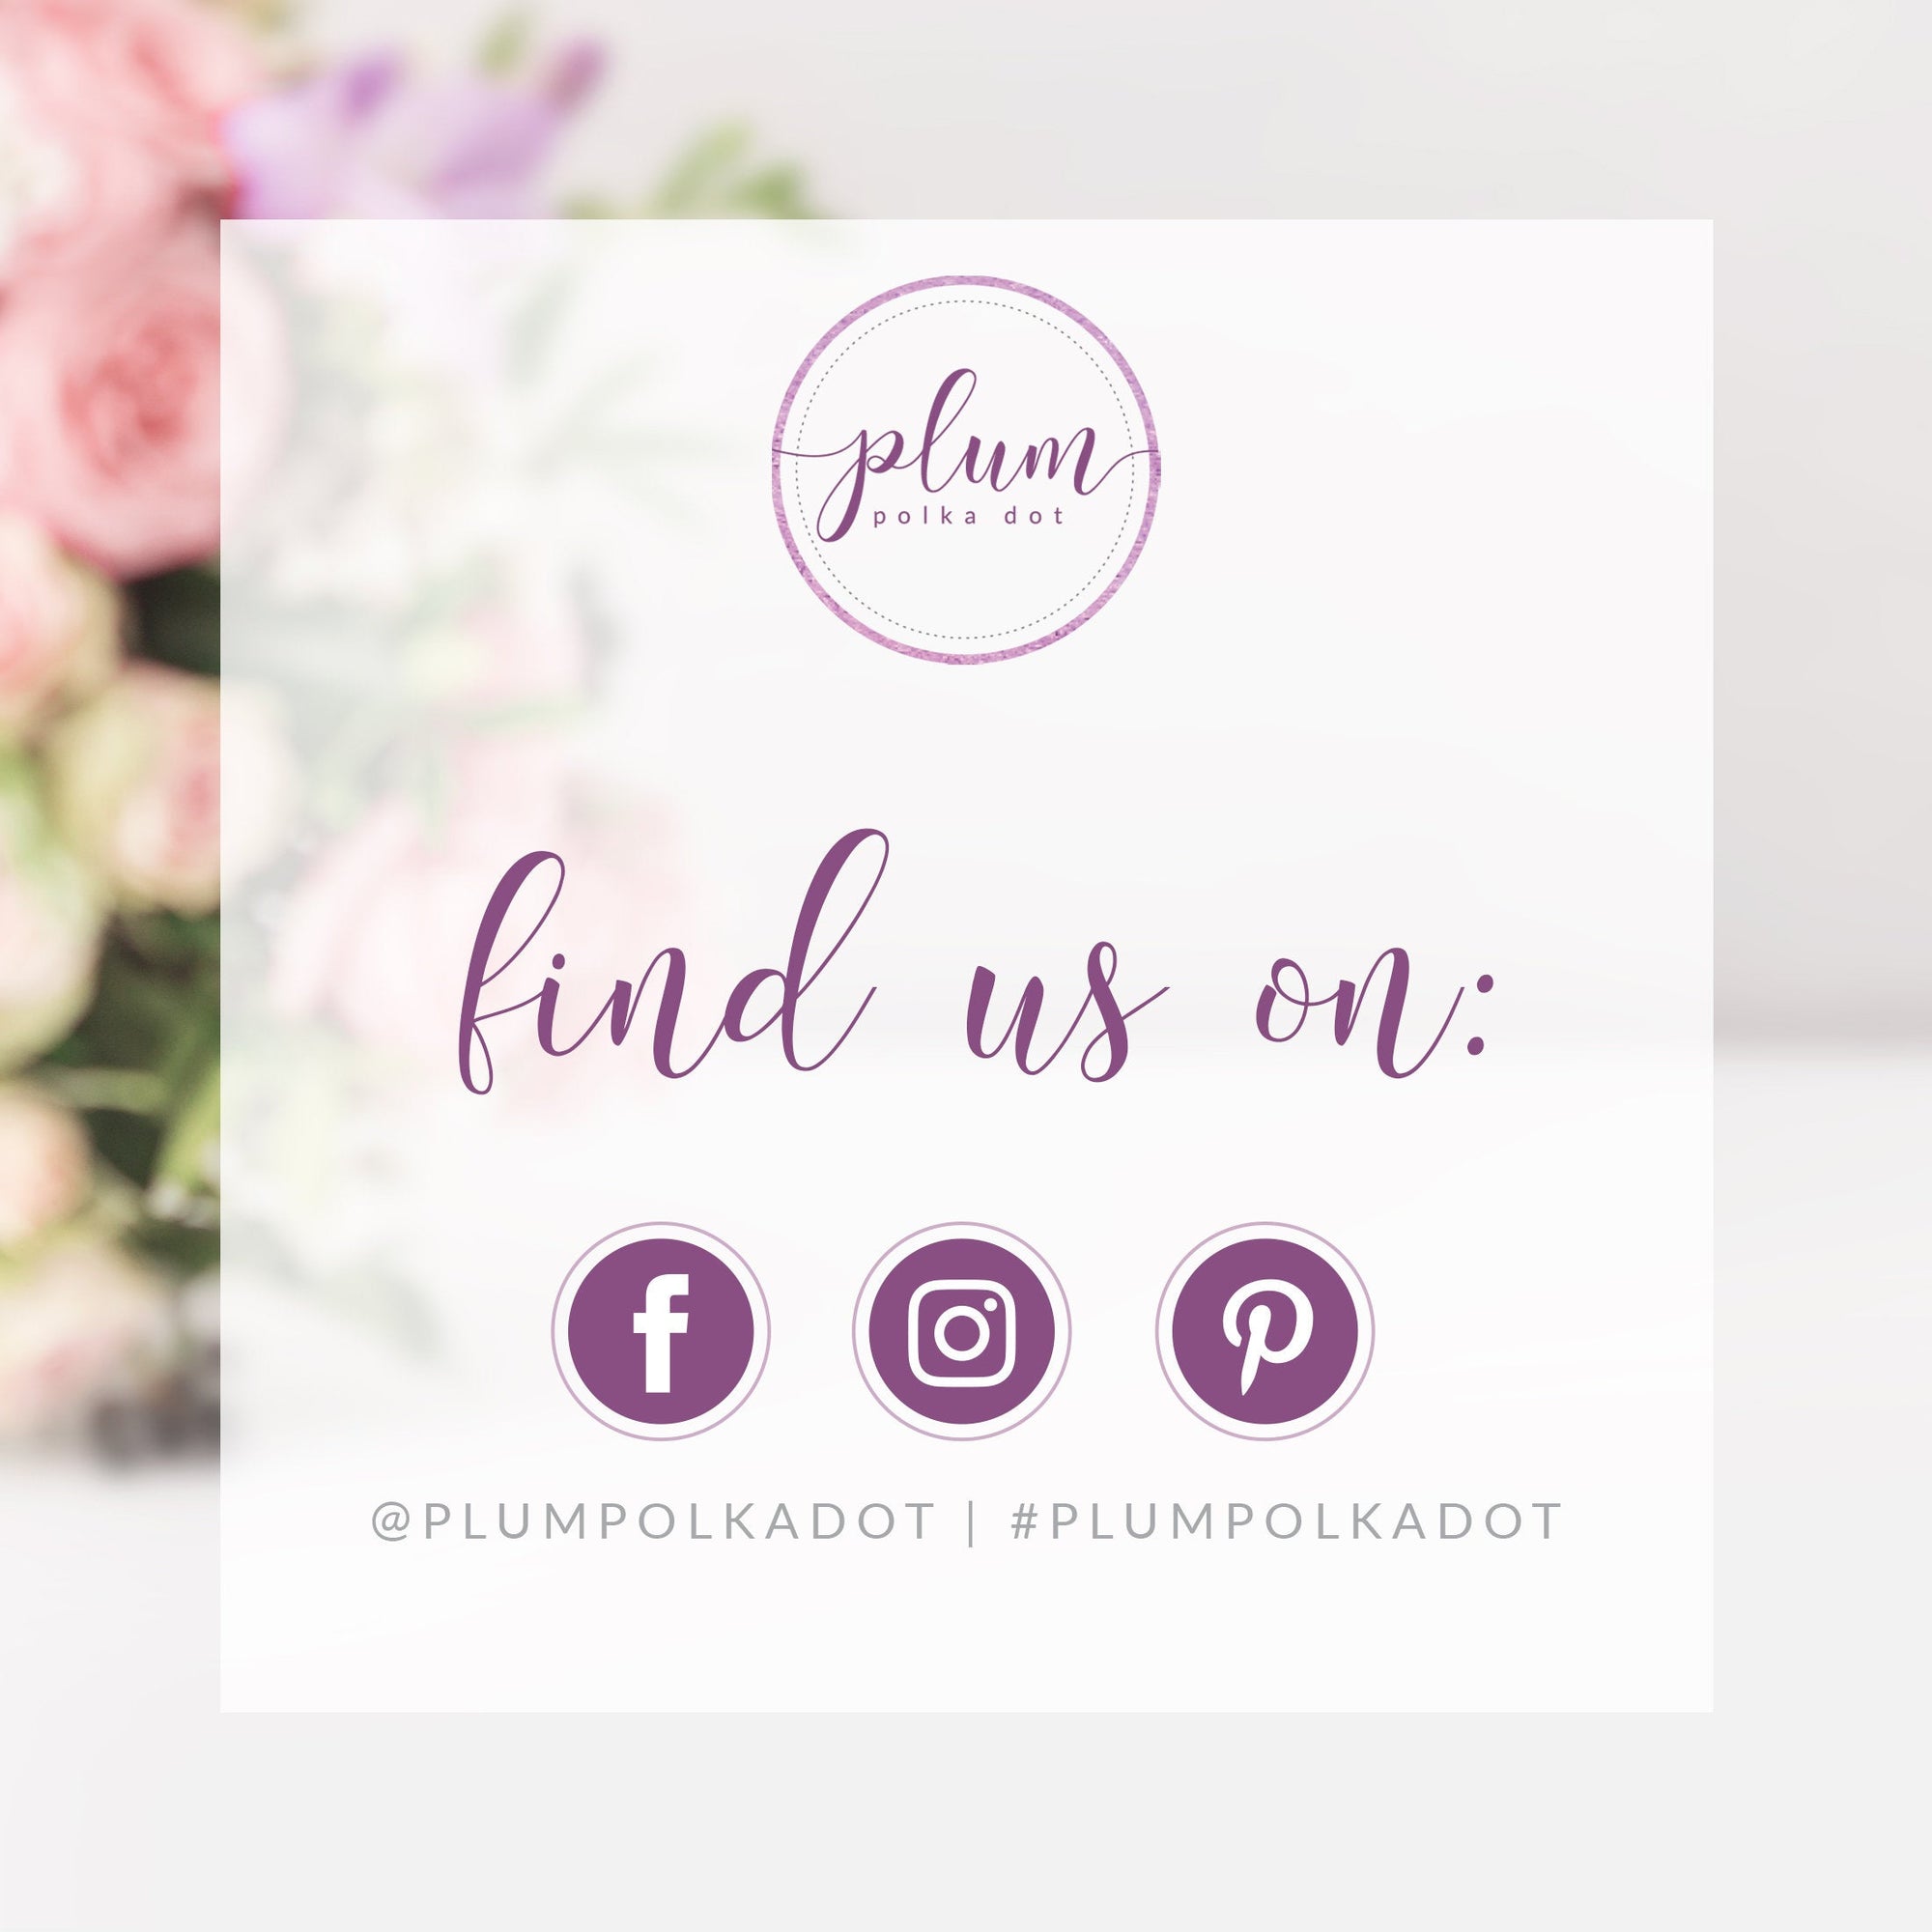 Pink Floral Wedding Place Card Template, Personalized Wedding Name Cards, Blush Printable Place Cards, DIGITAL DOWNLOAD - FR100 - @PlumPolkaDot 